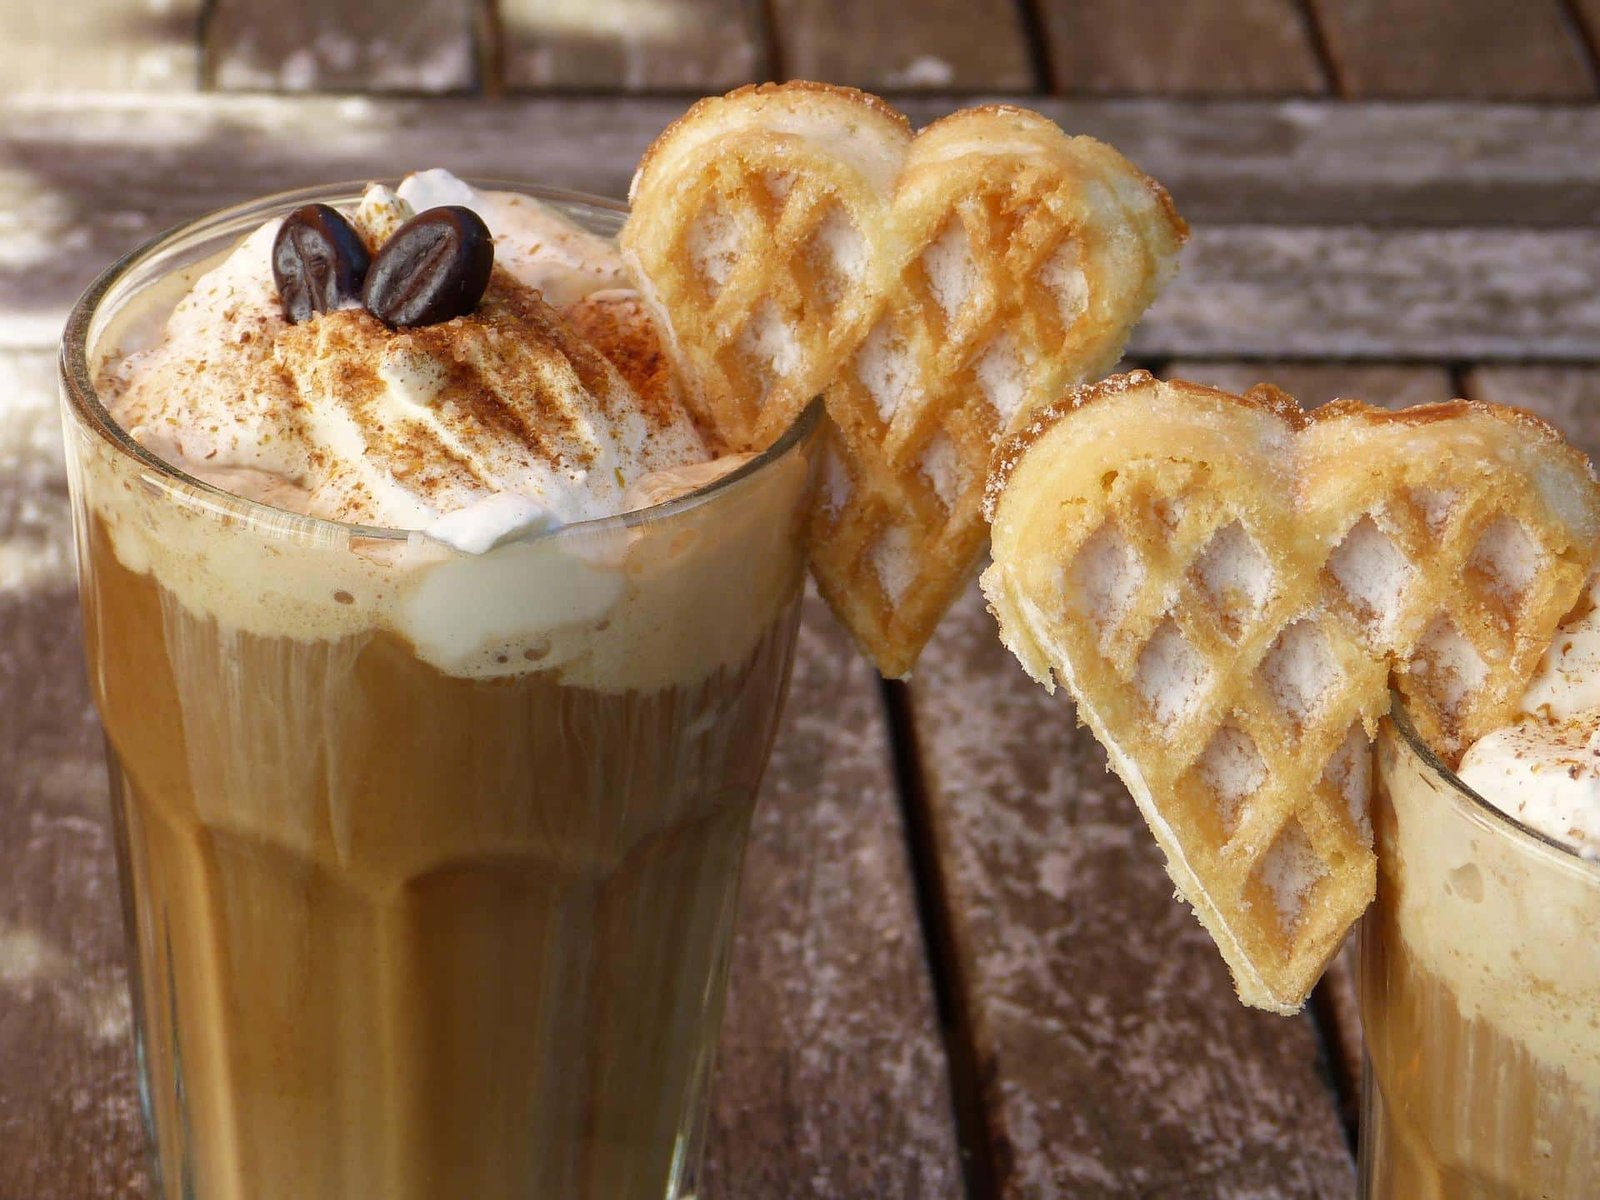 Coffee with Vanilla and Biscuits